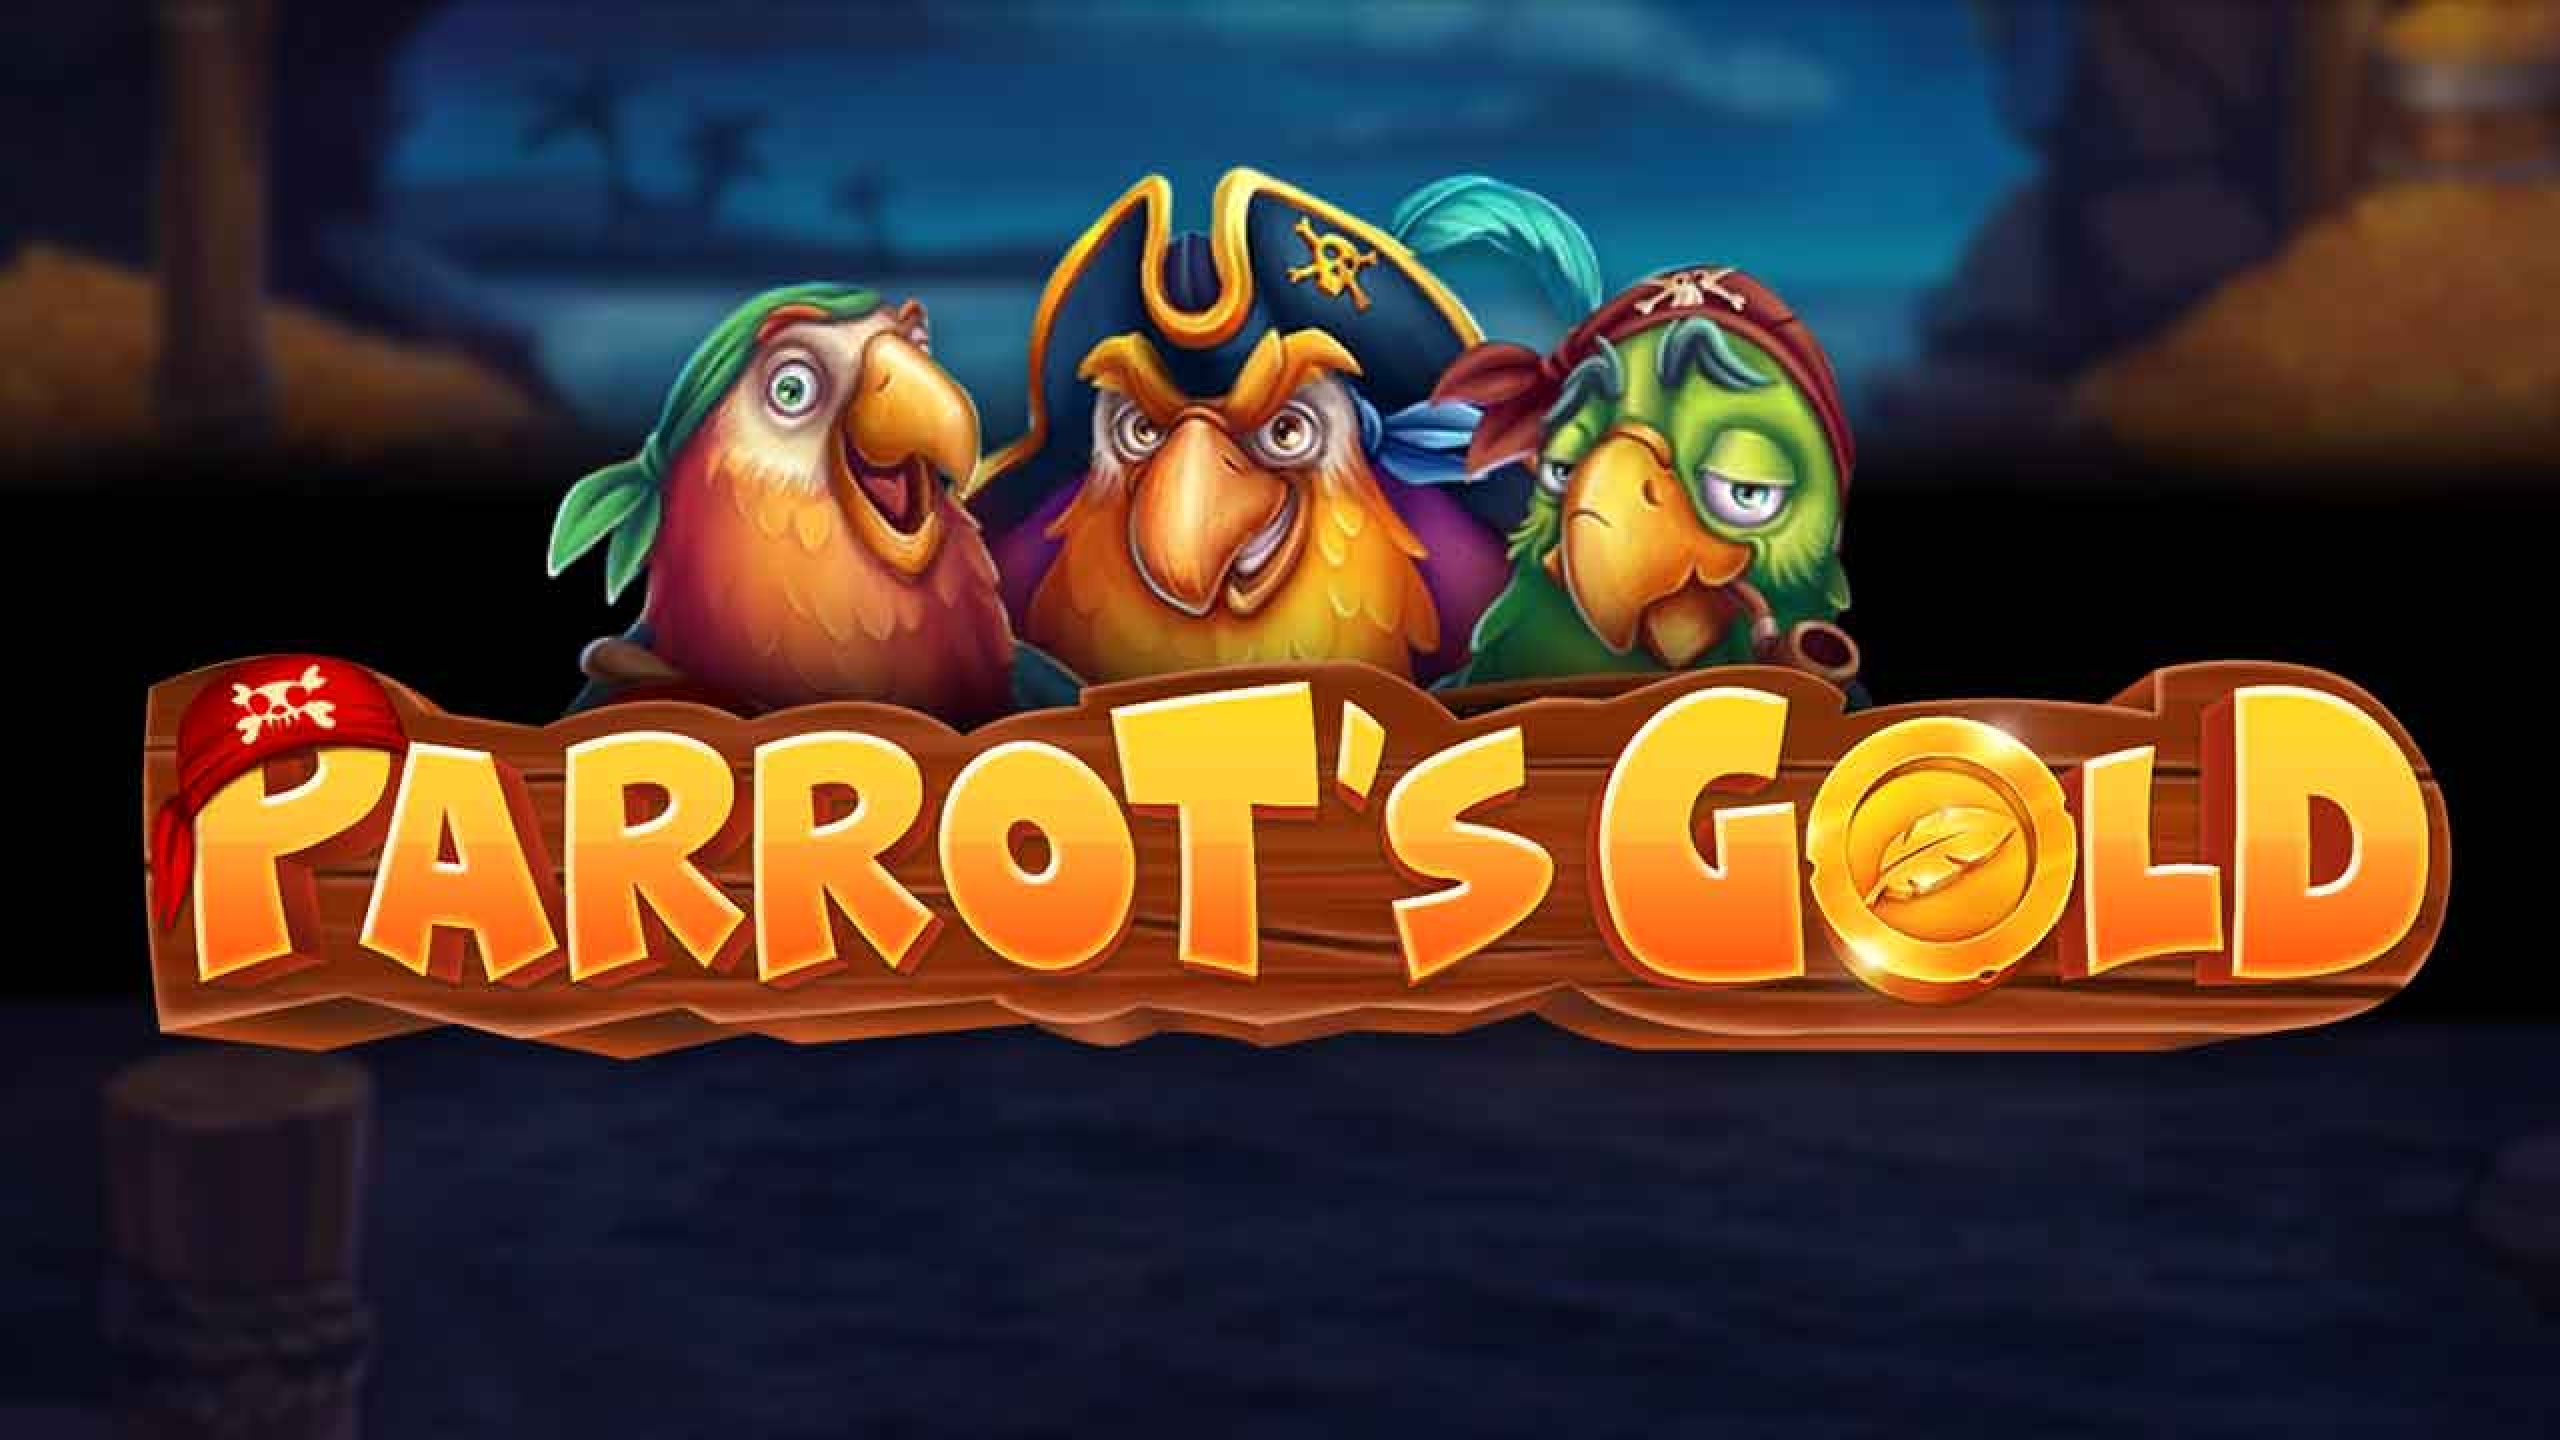 The Parrot's Gold Online Slot Demo Game by PariPlay